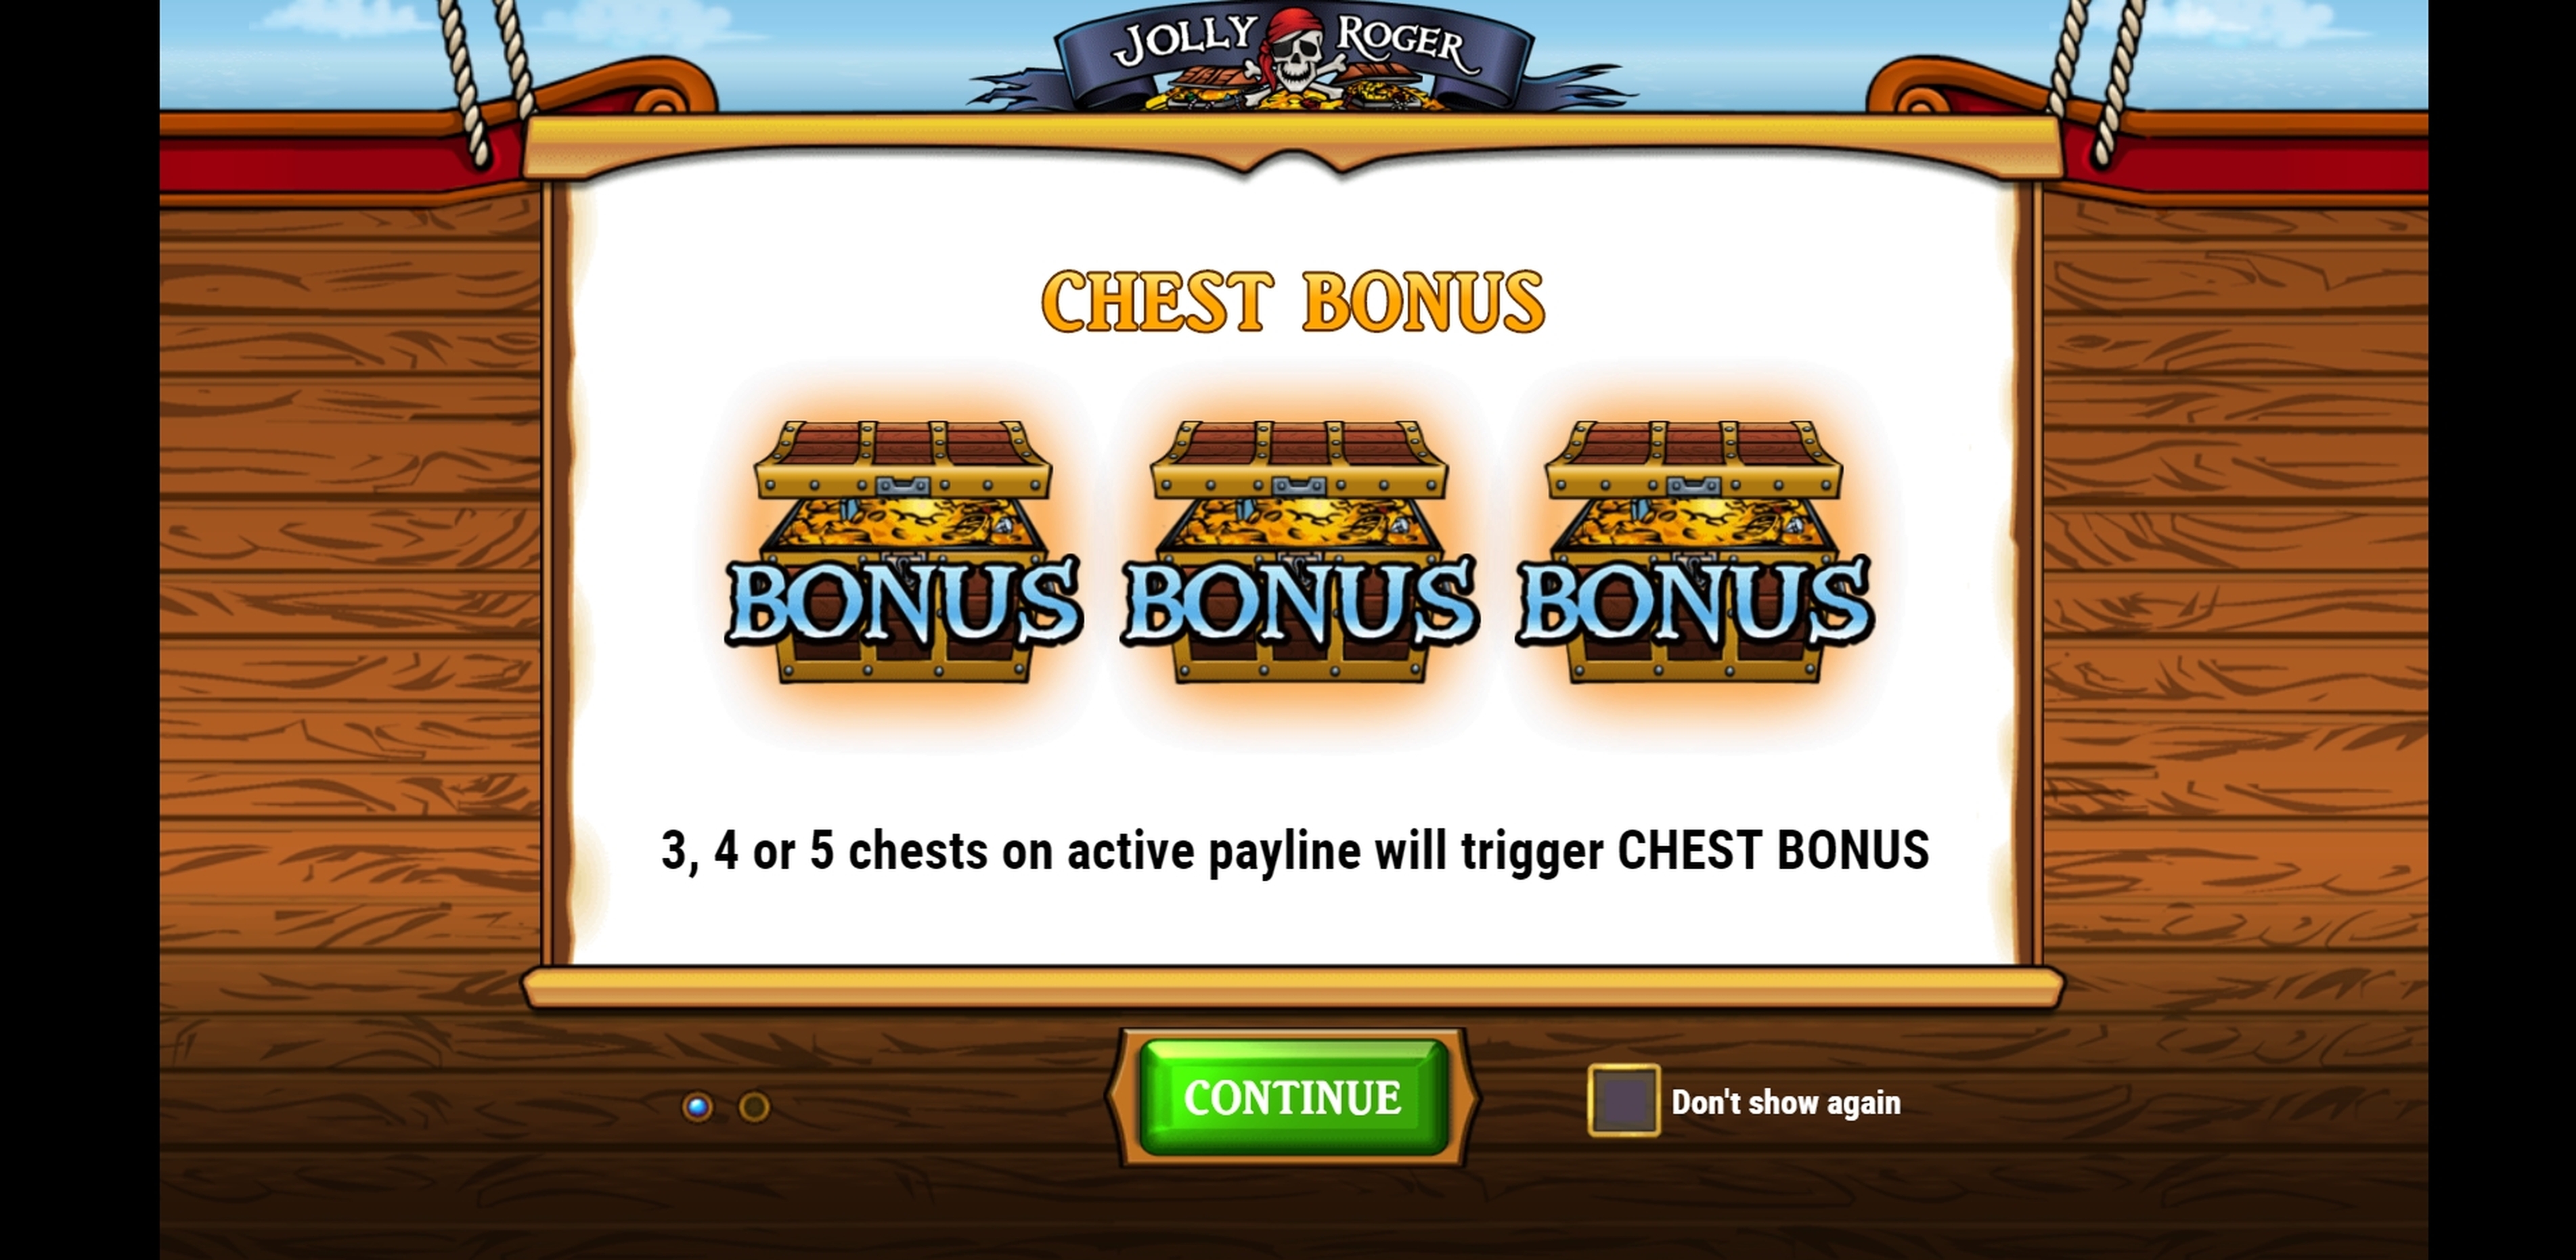 Play Jolly Roger Free Casino Slot Game by Playn GO